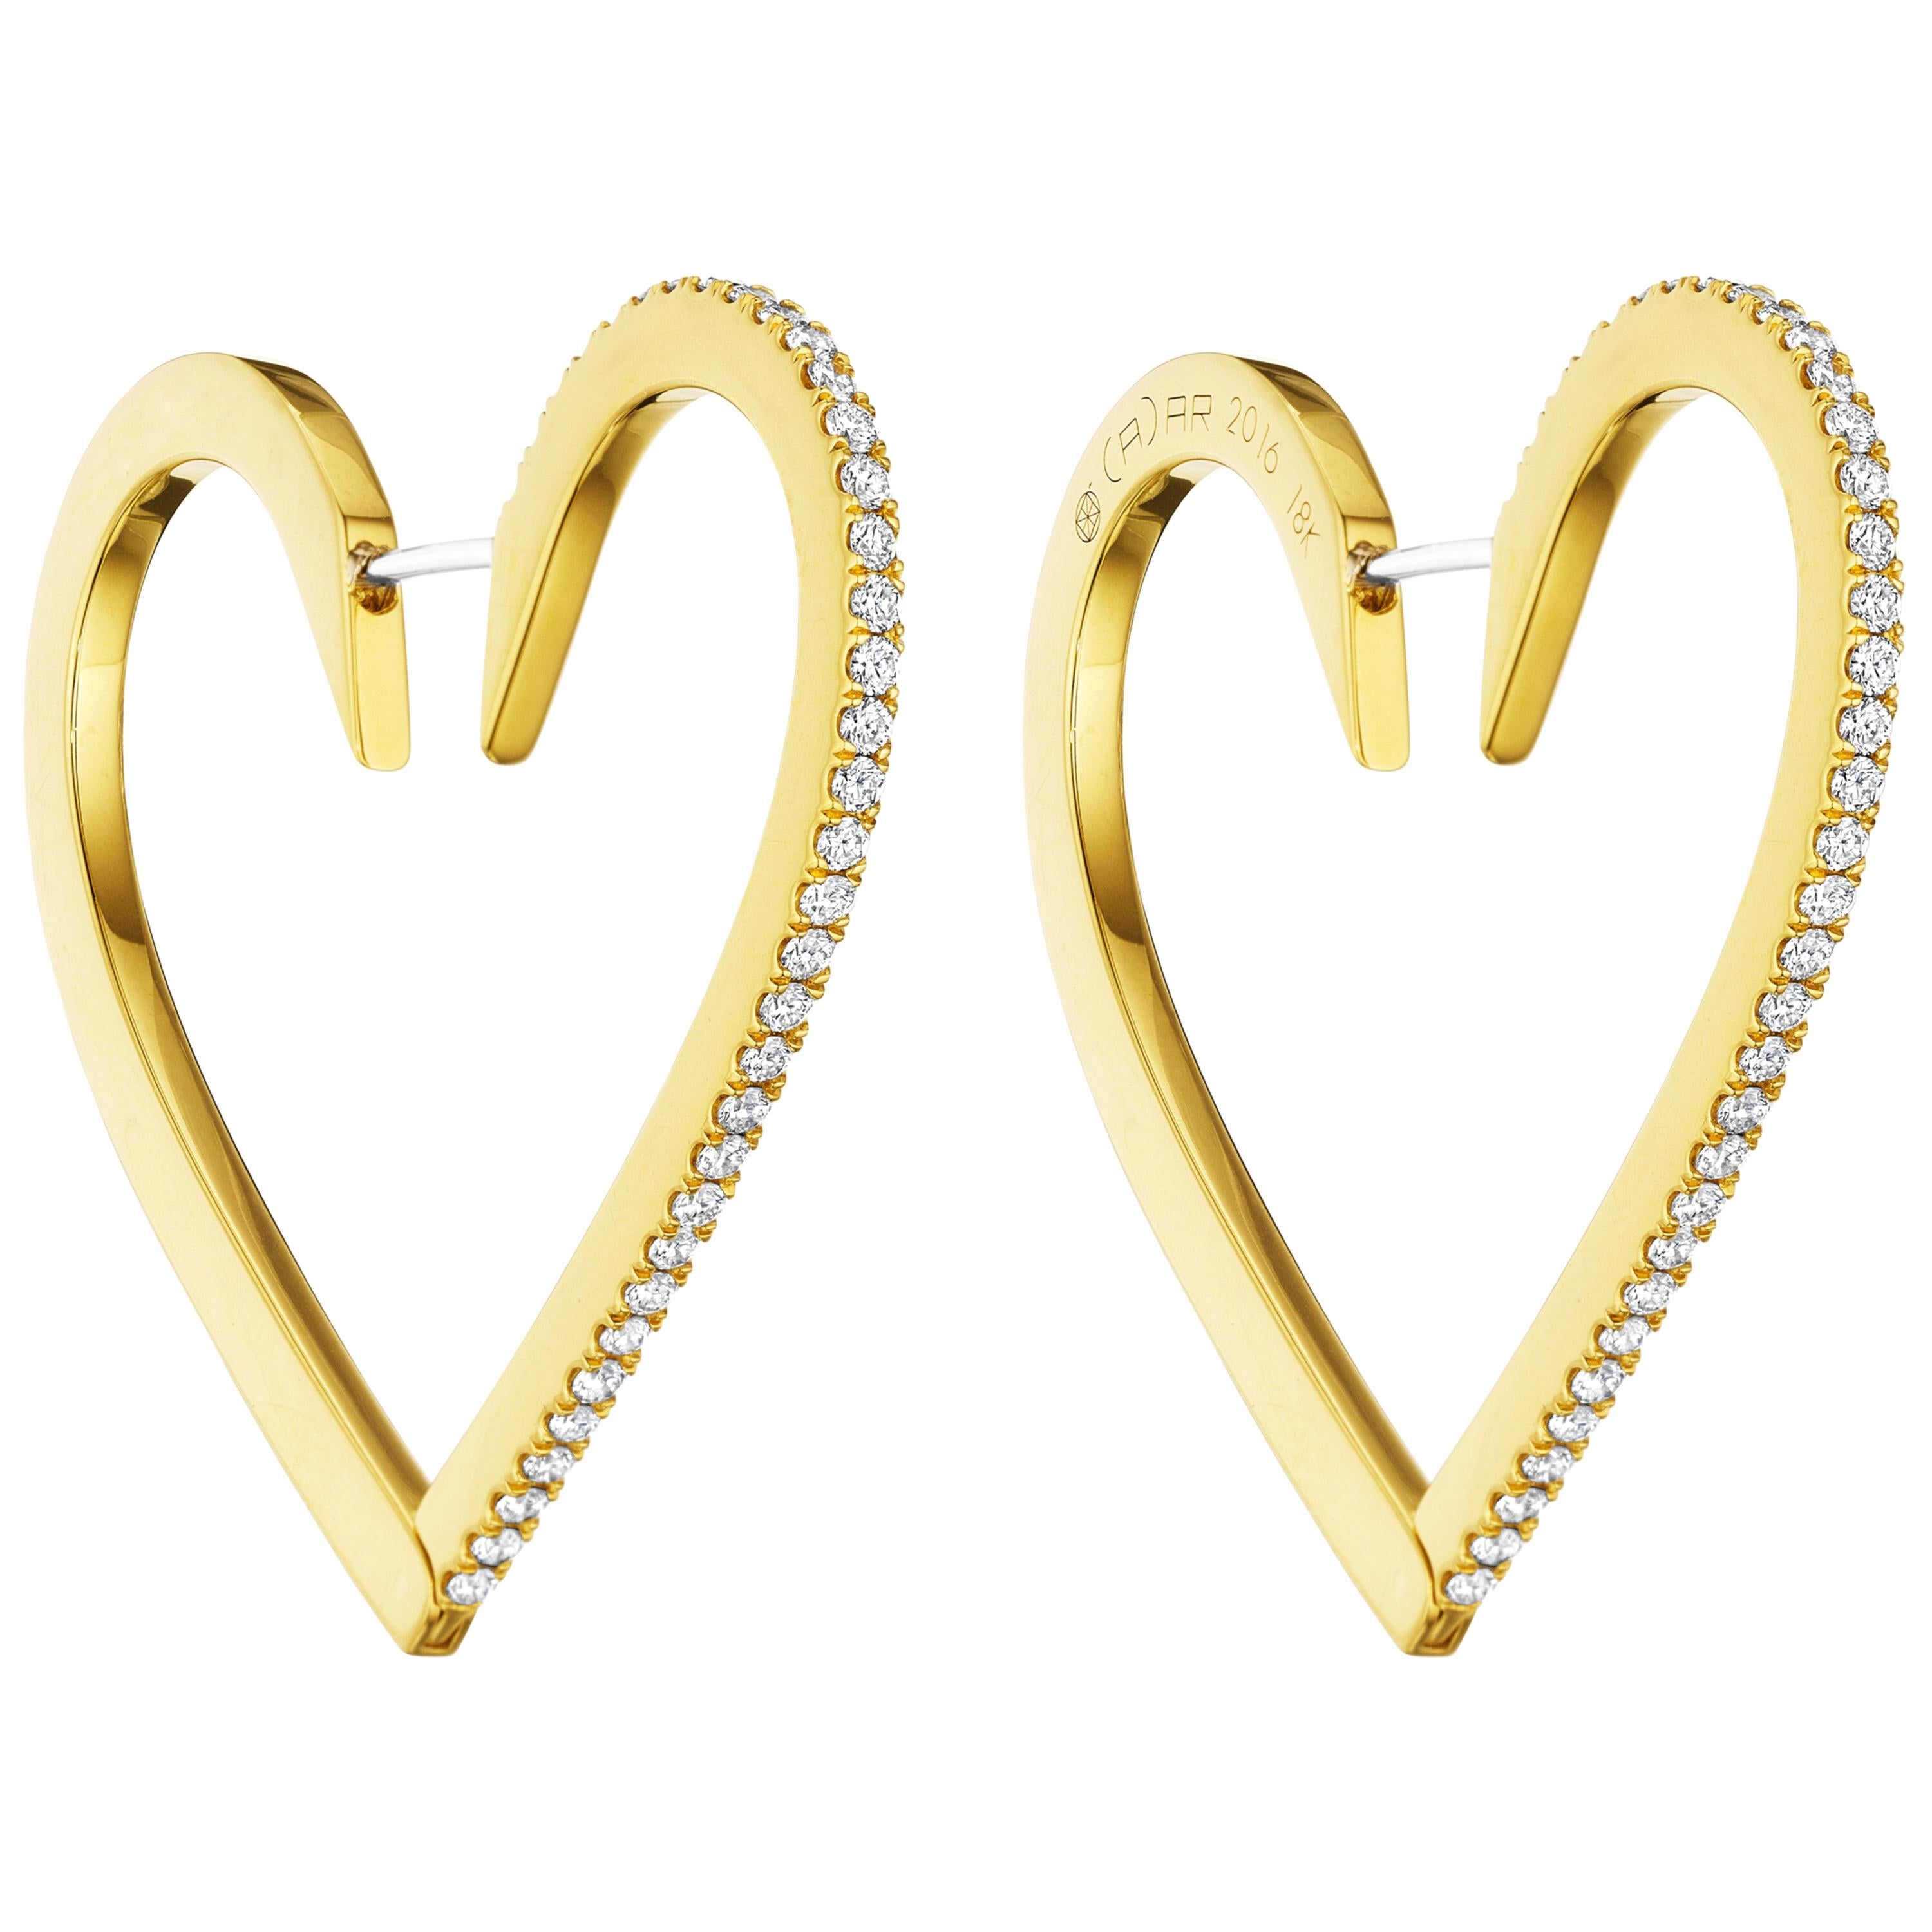 CADAR Endless Hoop Earrings, 18K Yellow Gold and White Diamonds - Large 